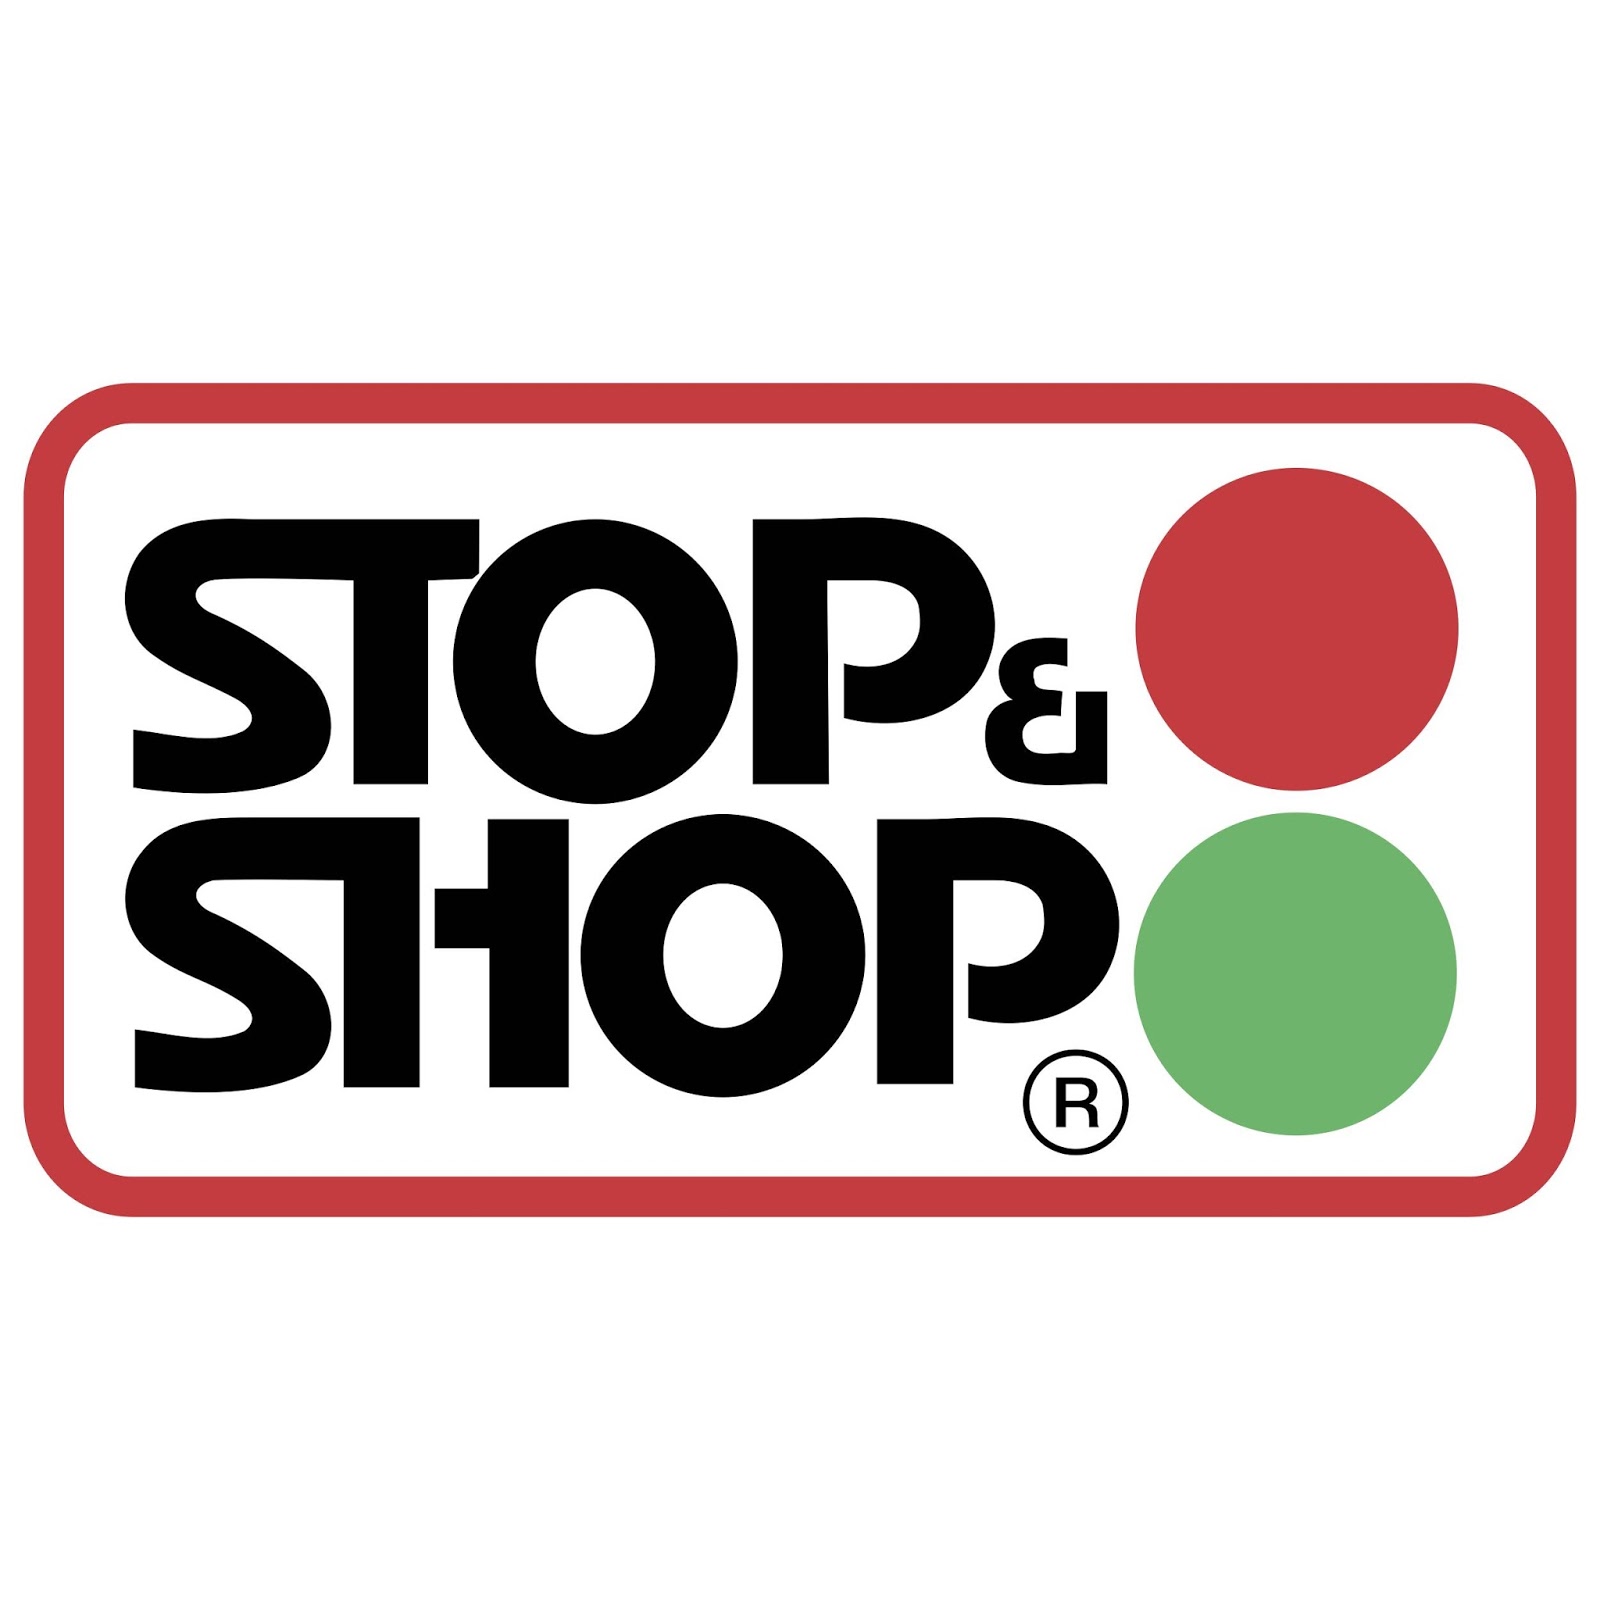 Image of a Stop & Shop store